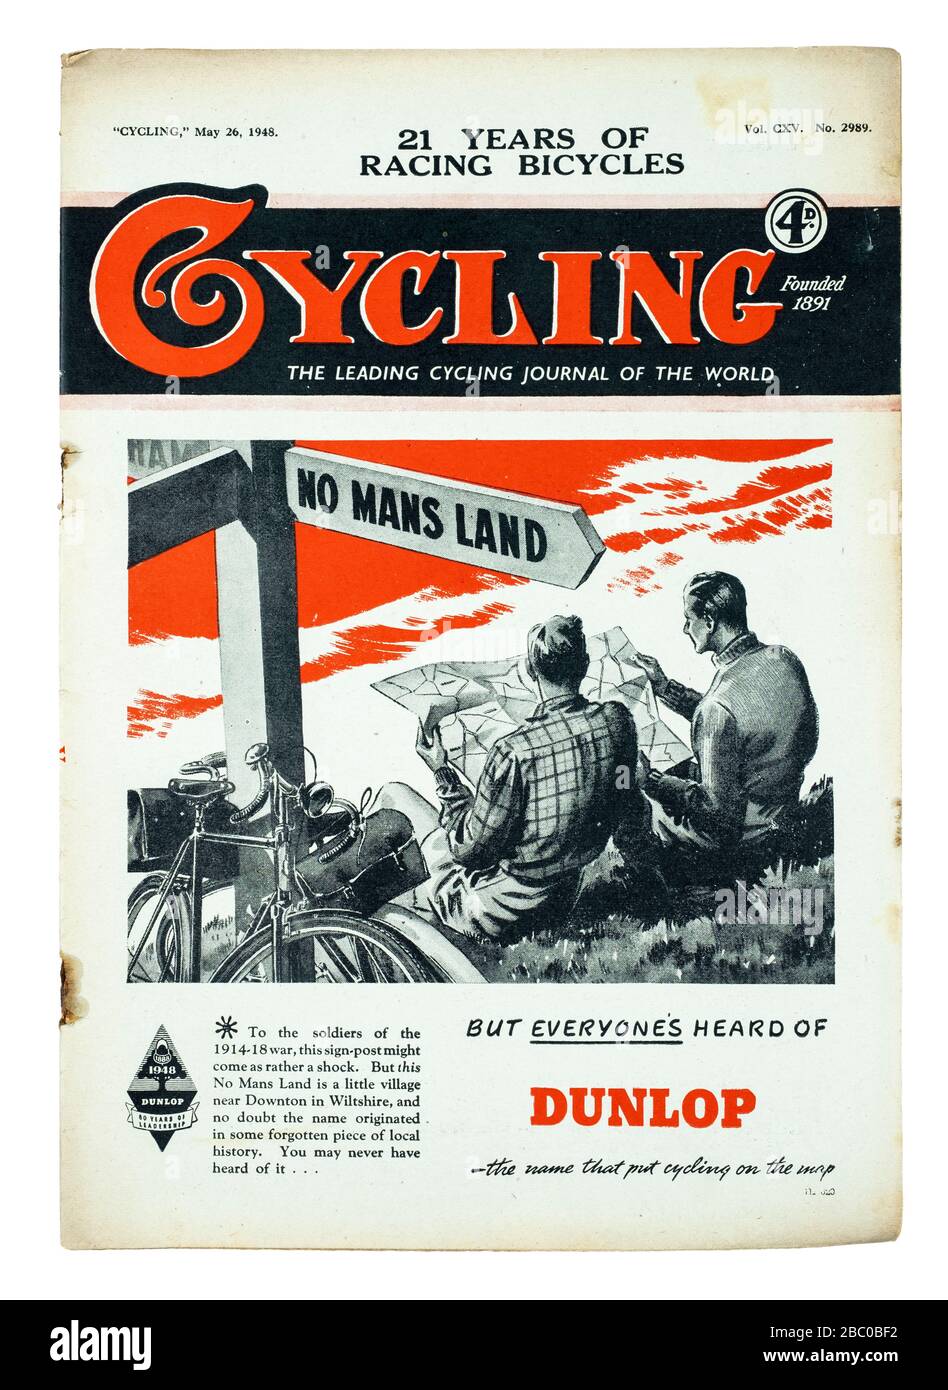 Vintage British 'Cycling' magazine from 1948 Stock Photo